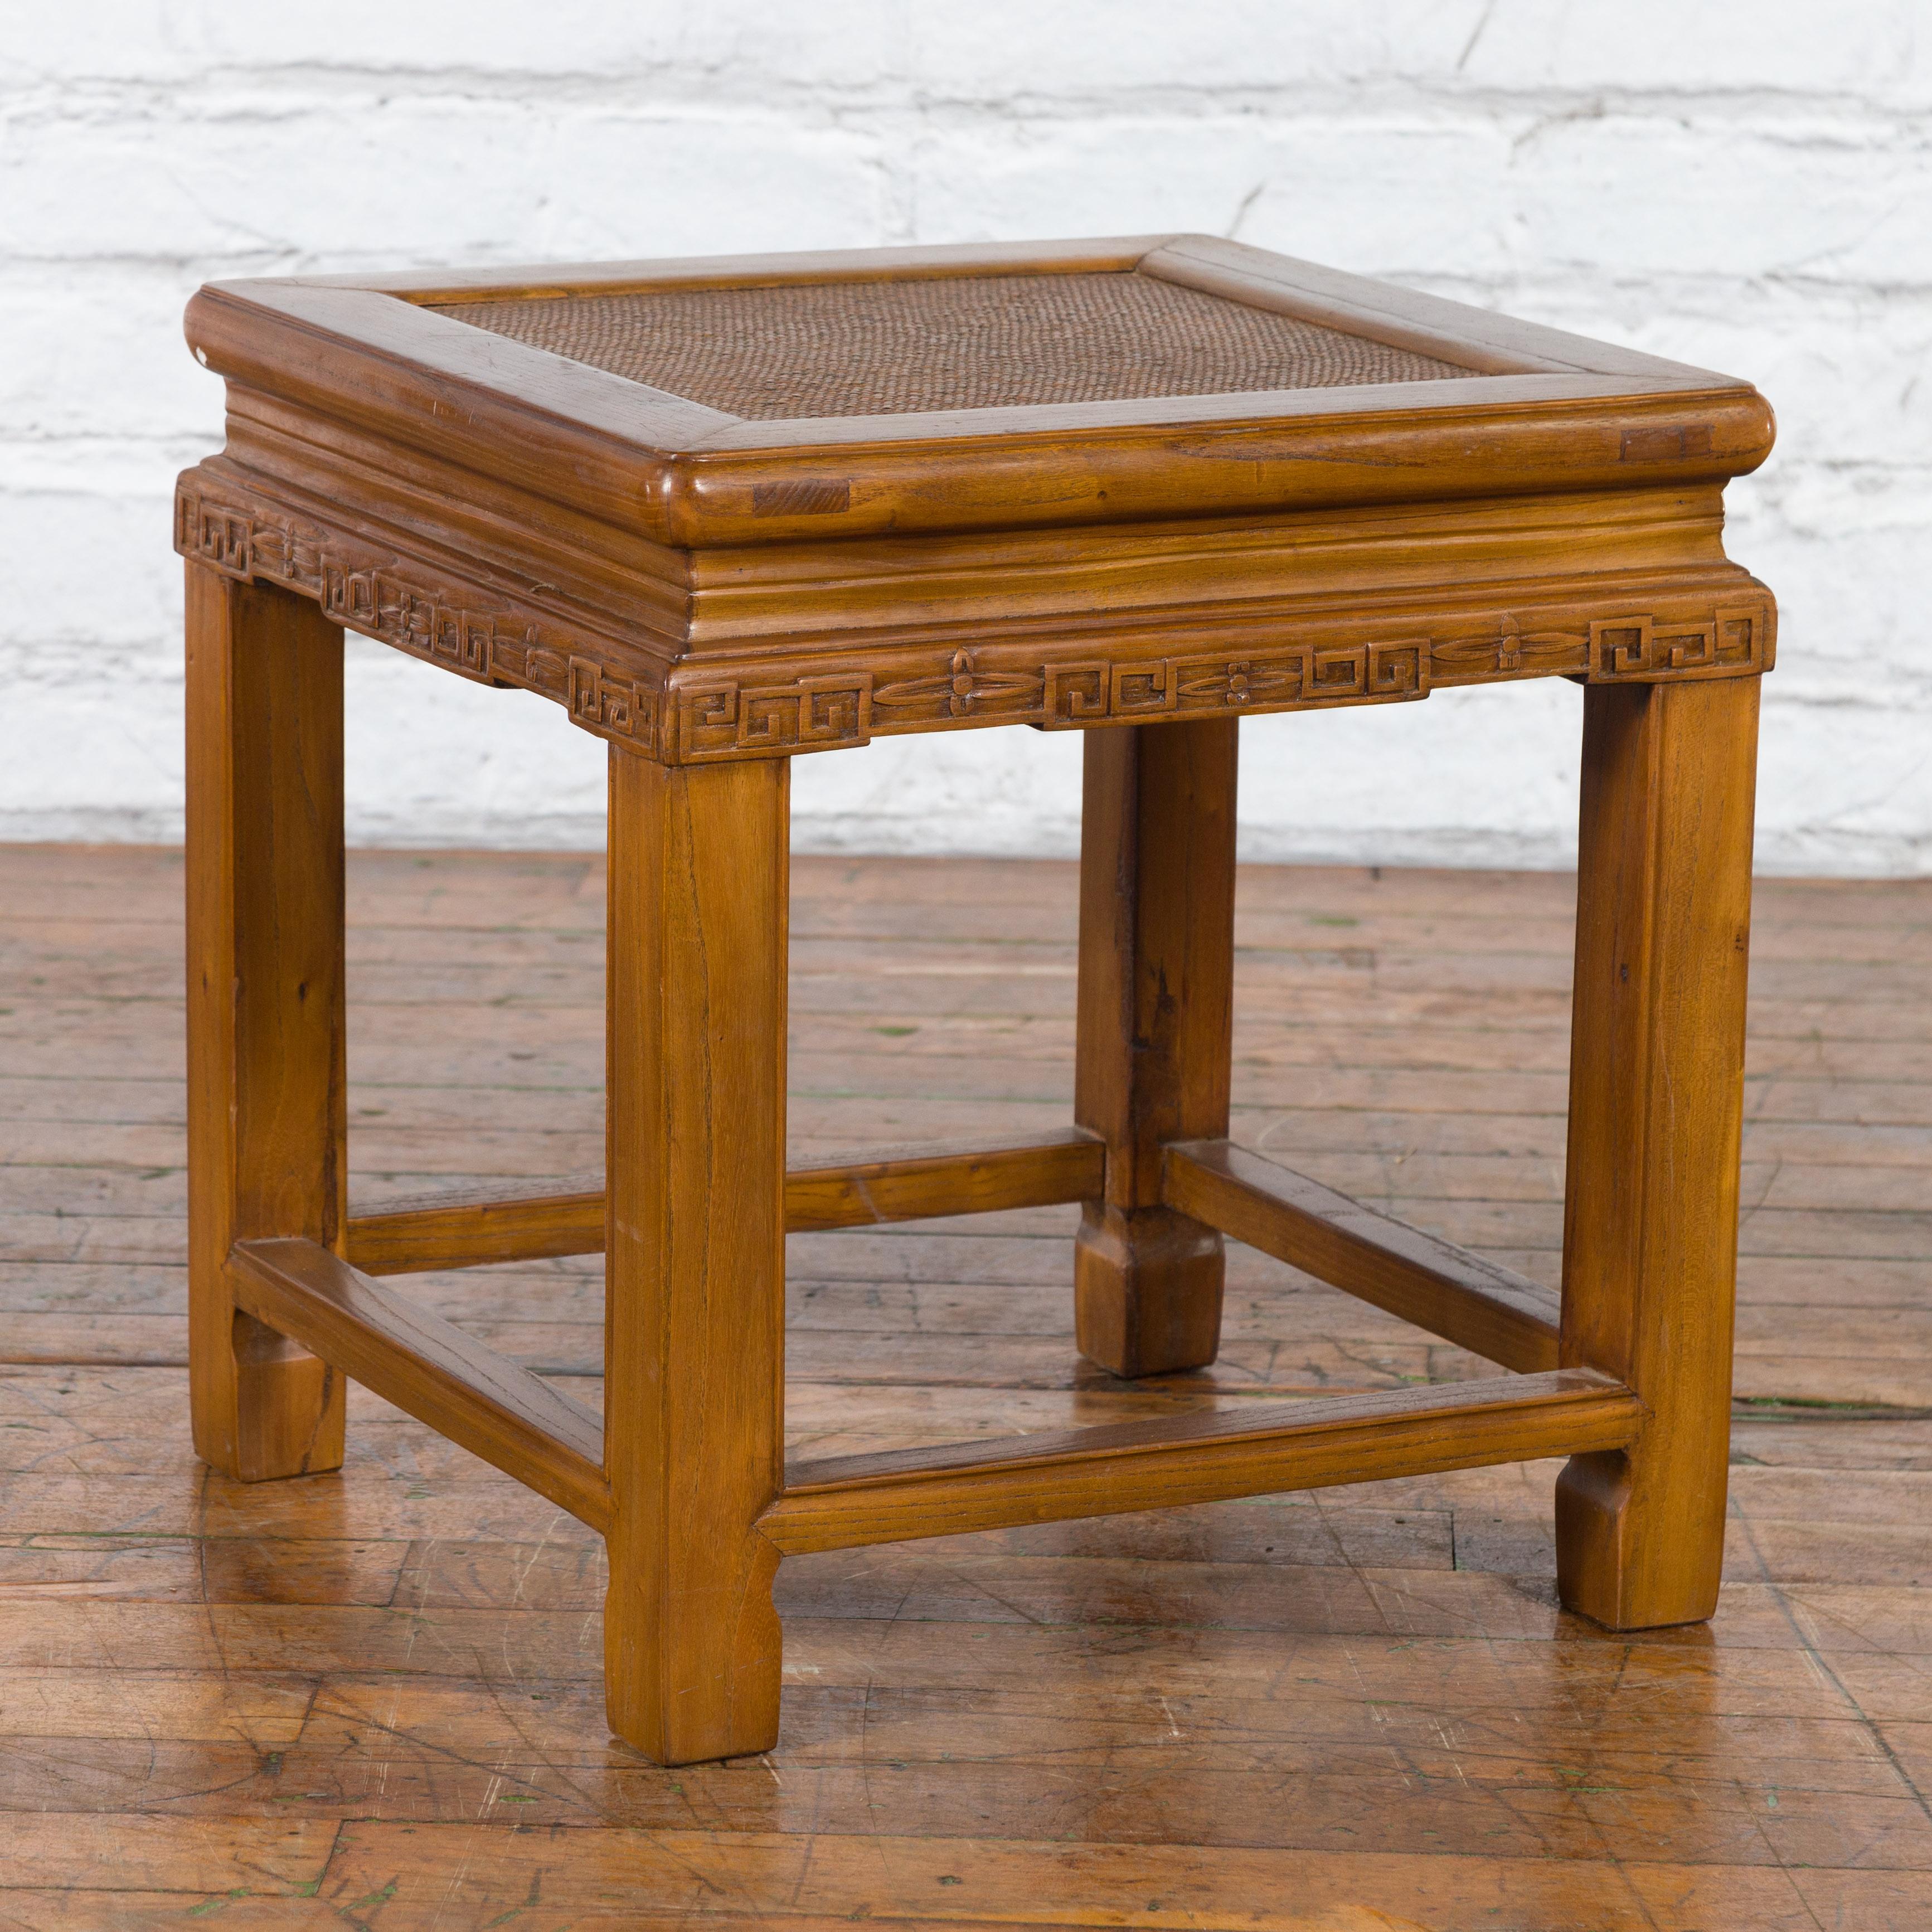 A Chinese antique side table from the early 20th century with carved apron, hand-woven rattan top and low stretchers. Created in China during the early years of the 20th century, this side table features a square top with woven rattan inset, sitting